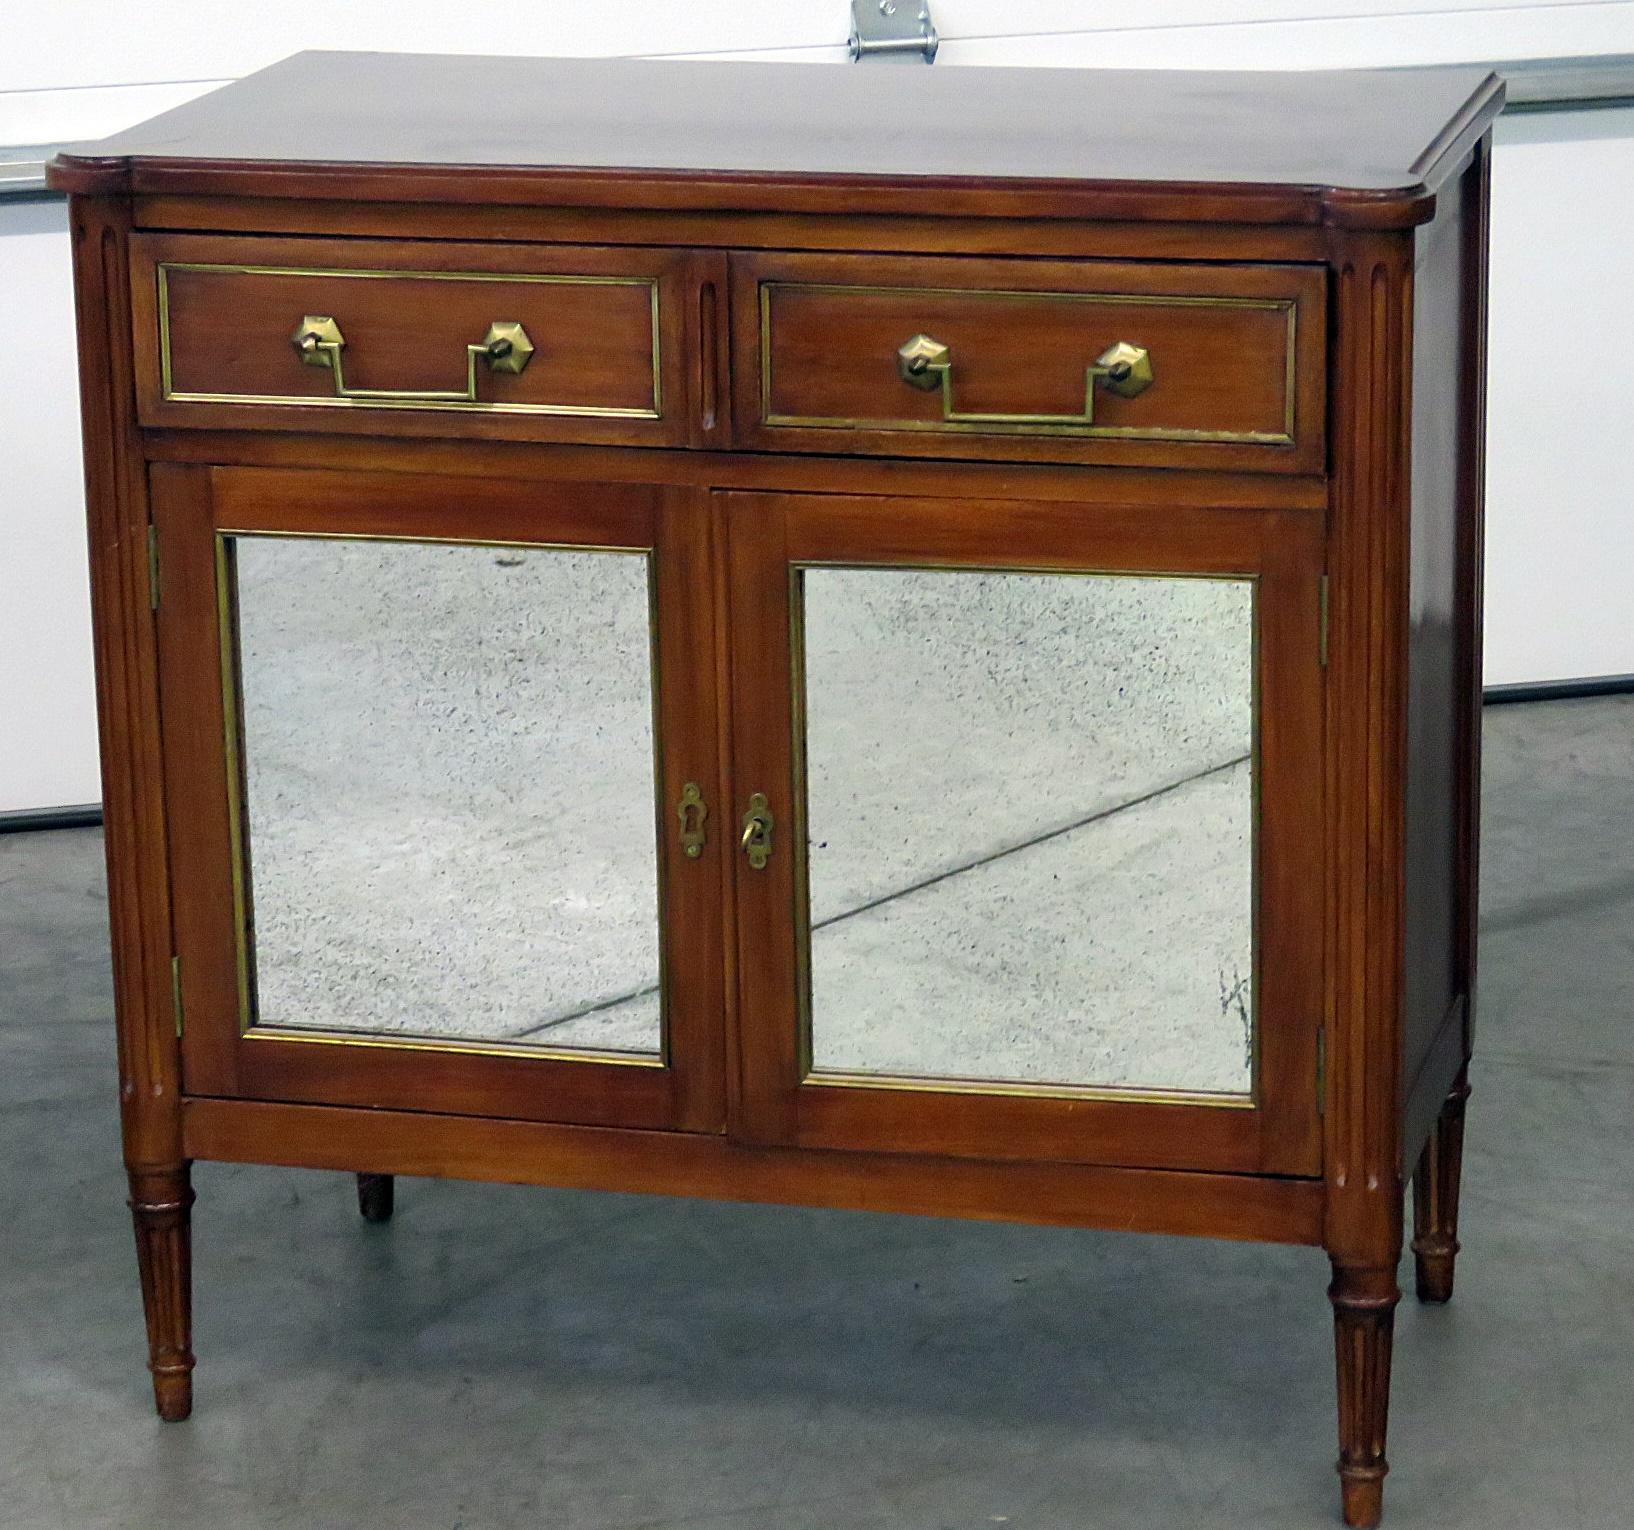 Pair of Maison Jansen Directoire style cabinets with one drawer over two doors containing one shelf and bronze monts.